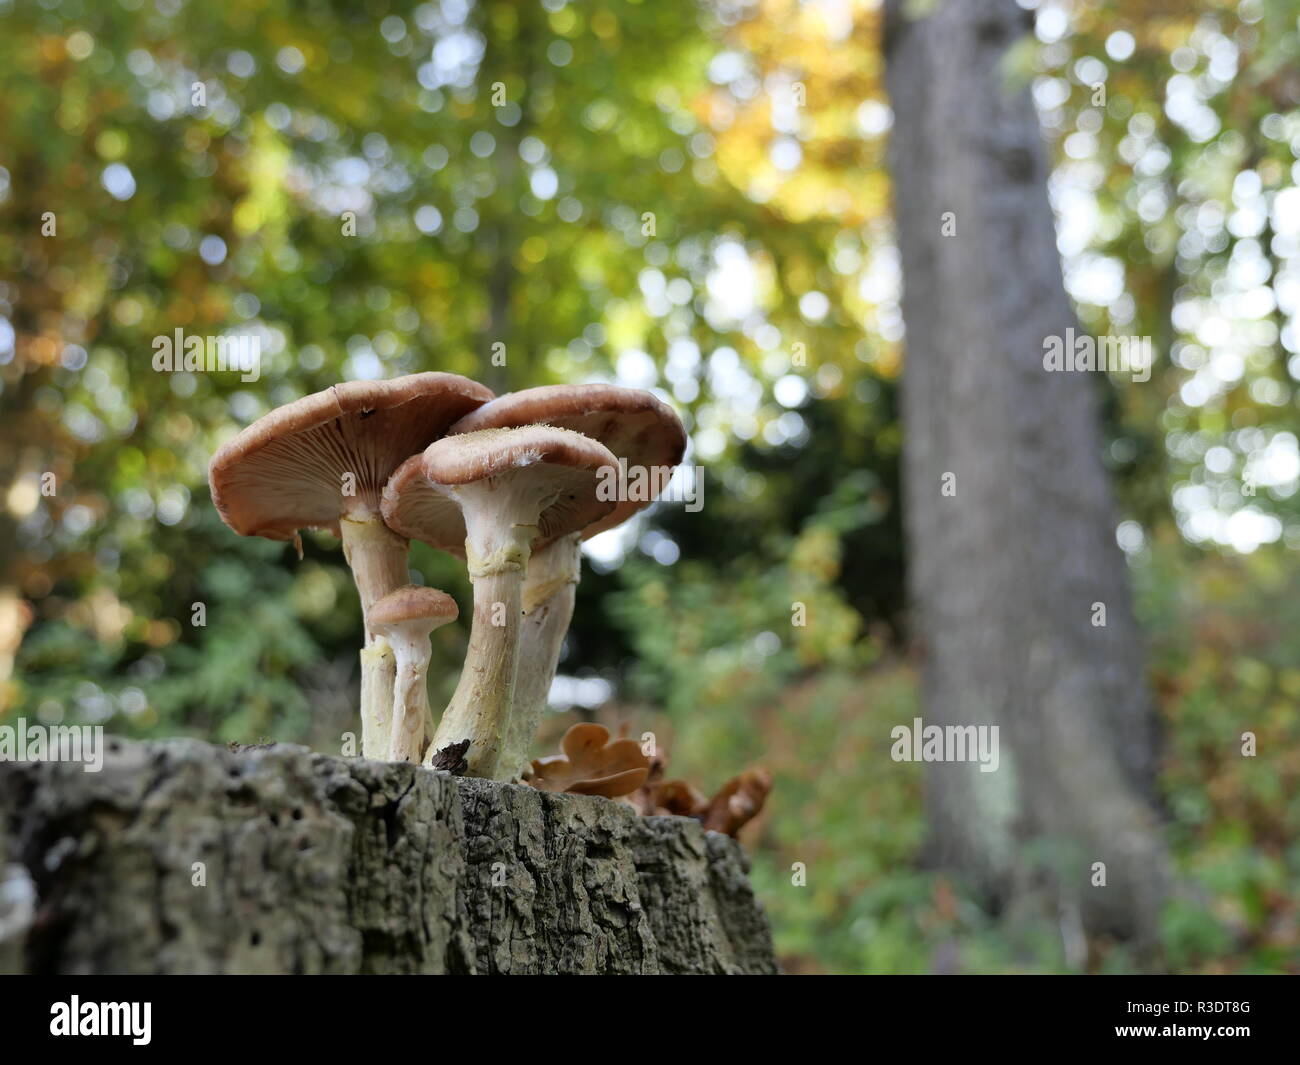 small group of mushrooms on a tree stump against a colorful background Stock Photo